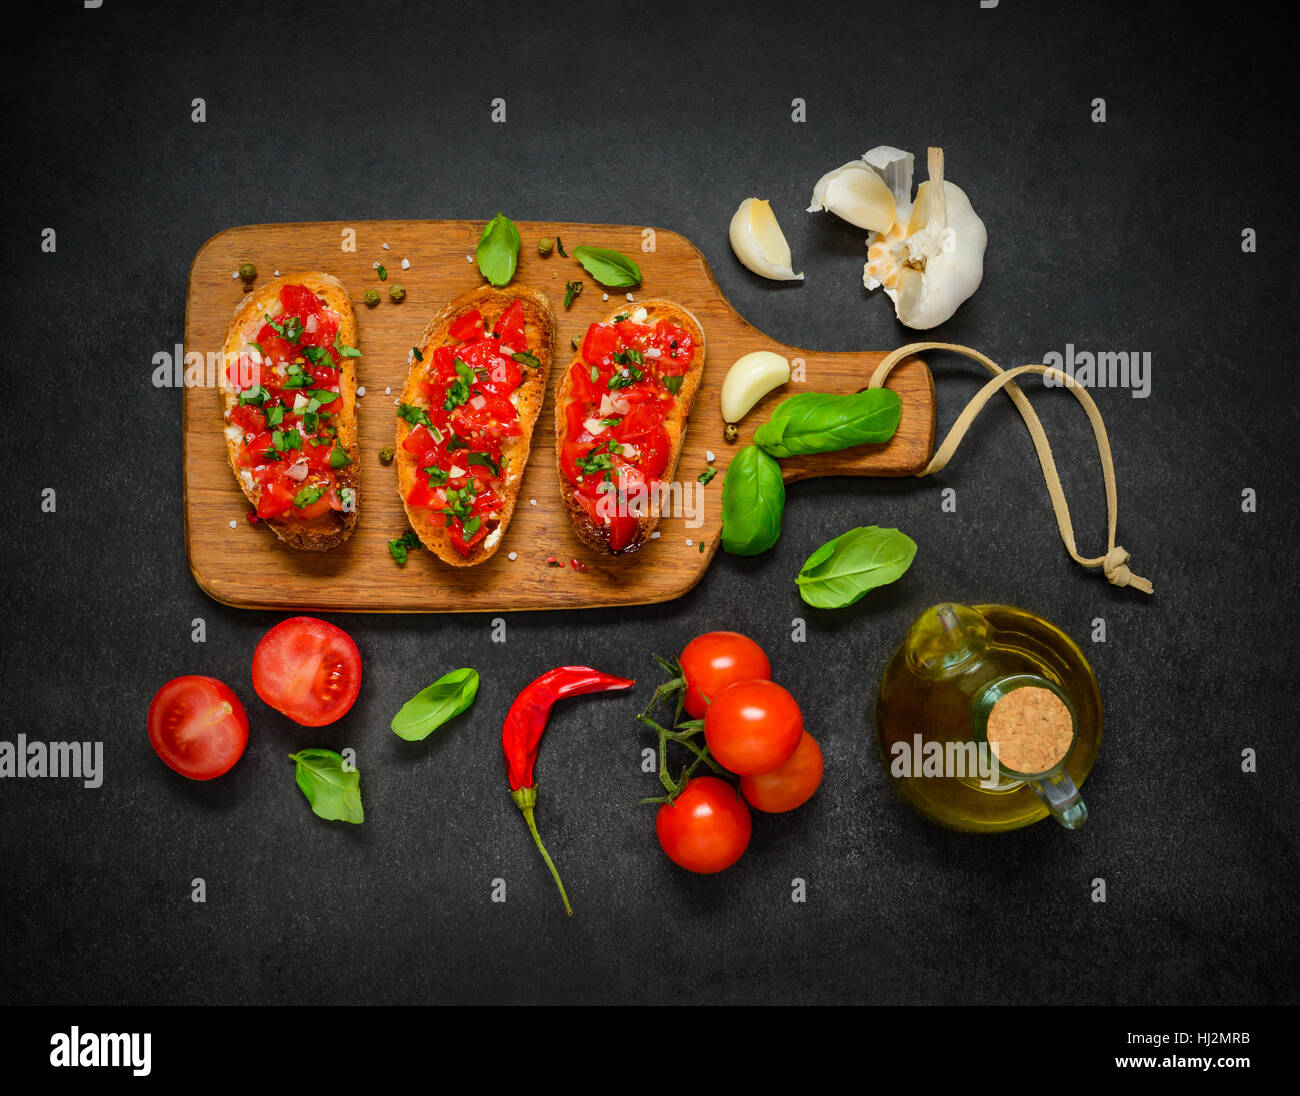 Bruschetta with Fresh Tomato and Basil. Vegetables with Olive Oil Stock Photo